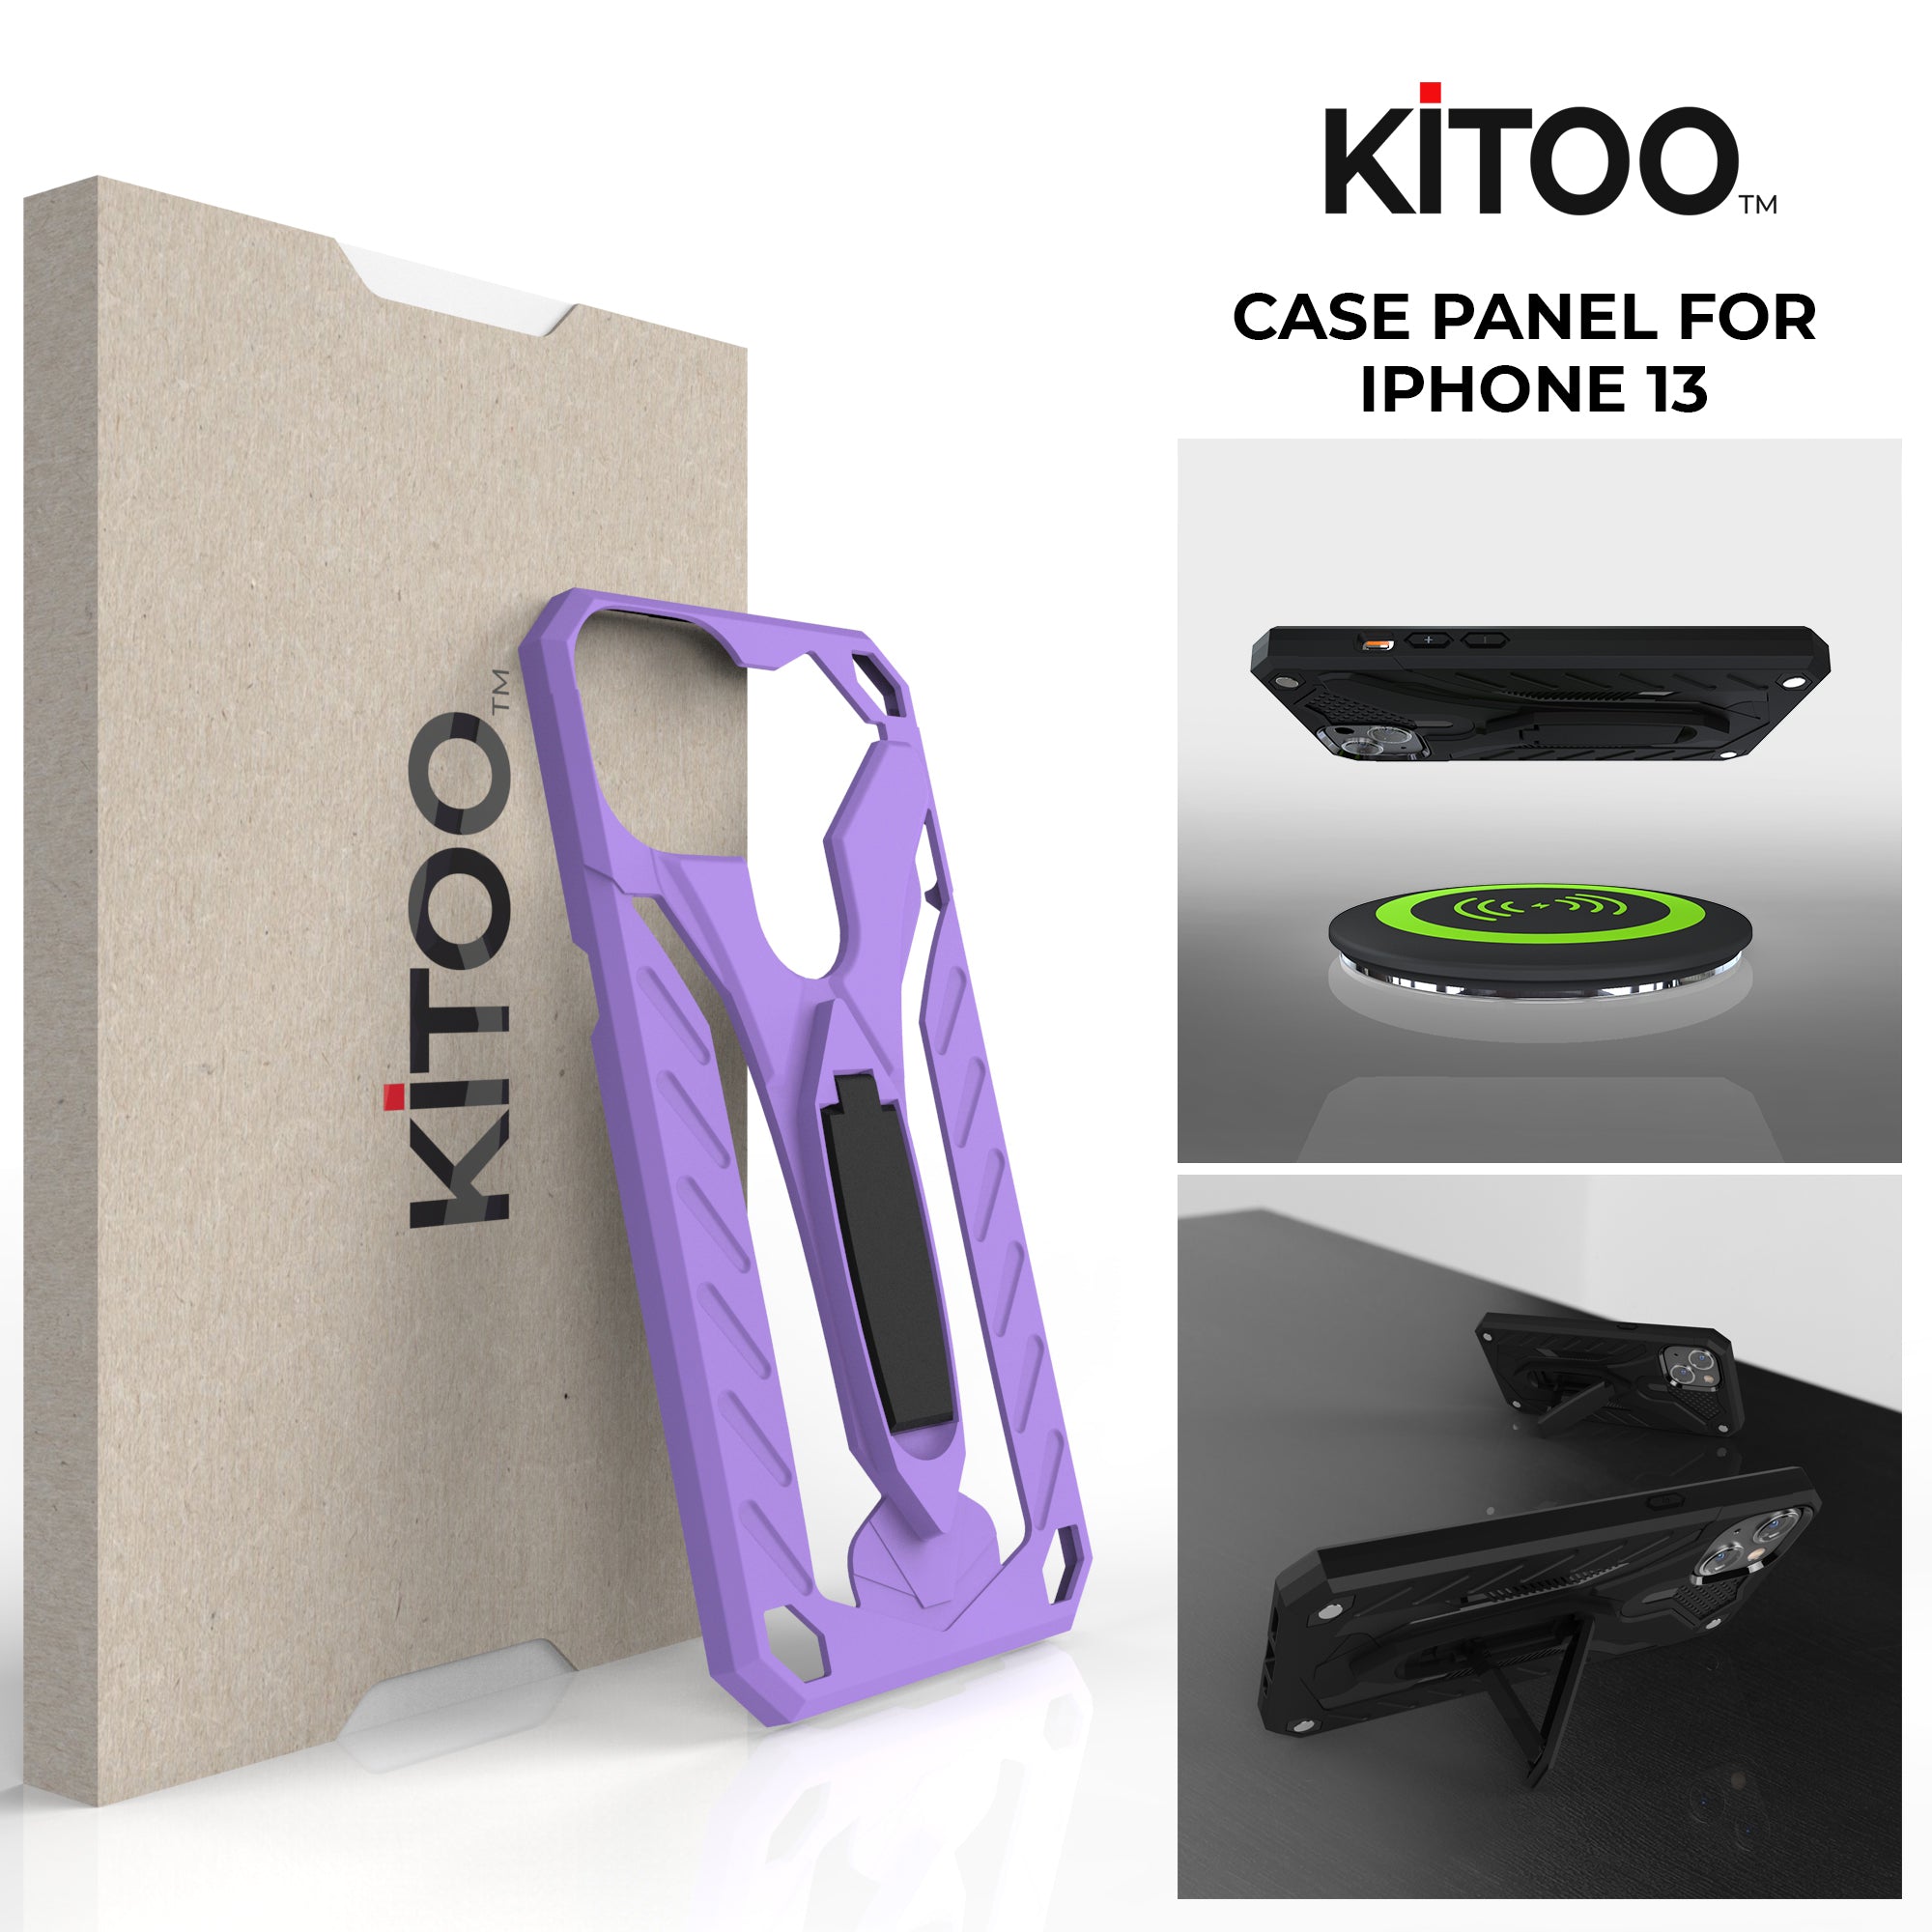 Kitoo Kiсkstand Panel Designed for iPhone 13 case (Spare Part only) - Purple